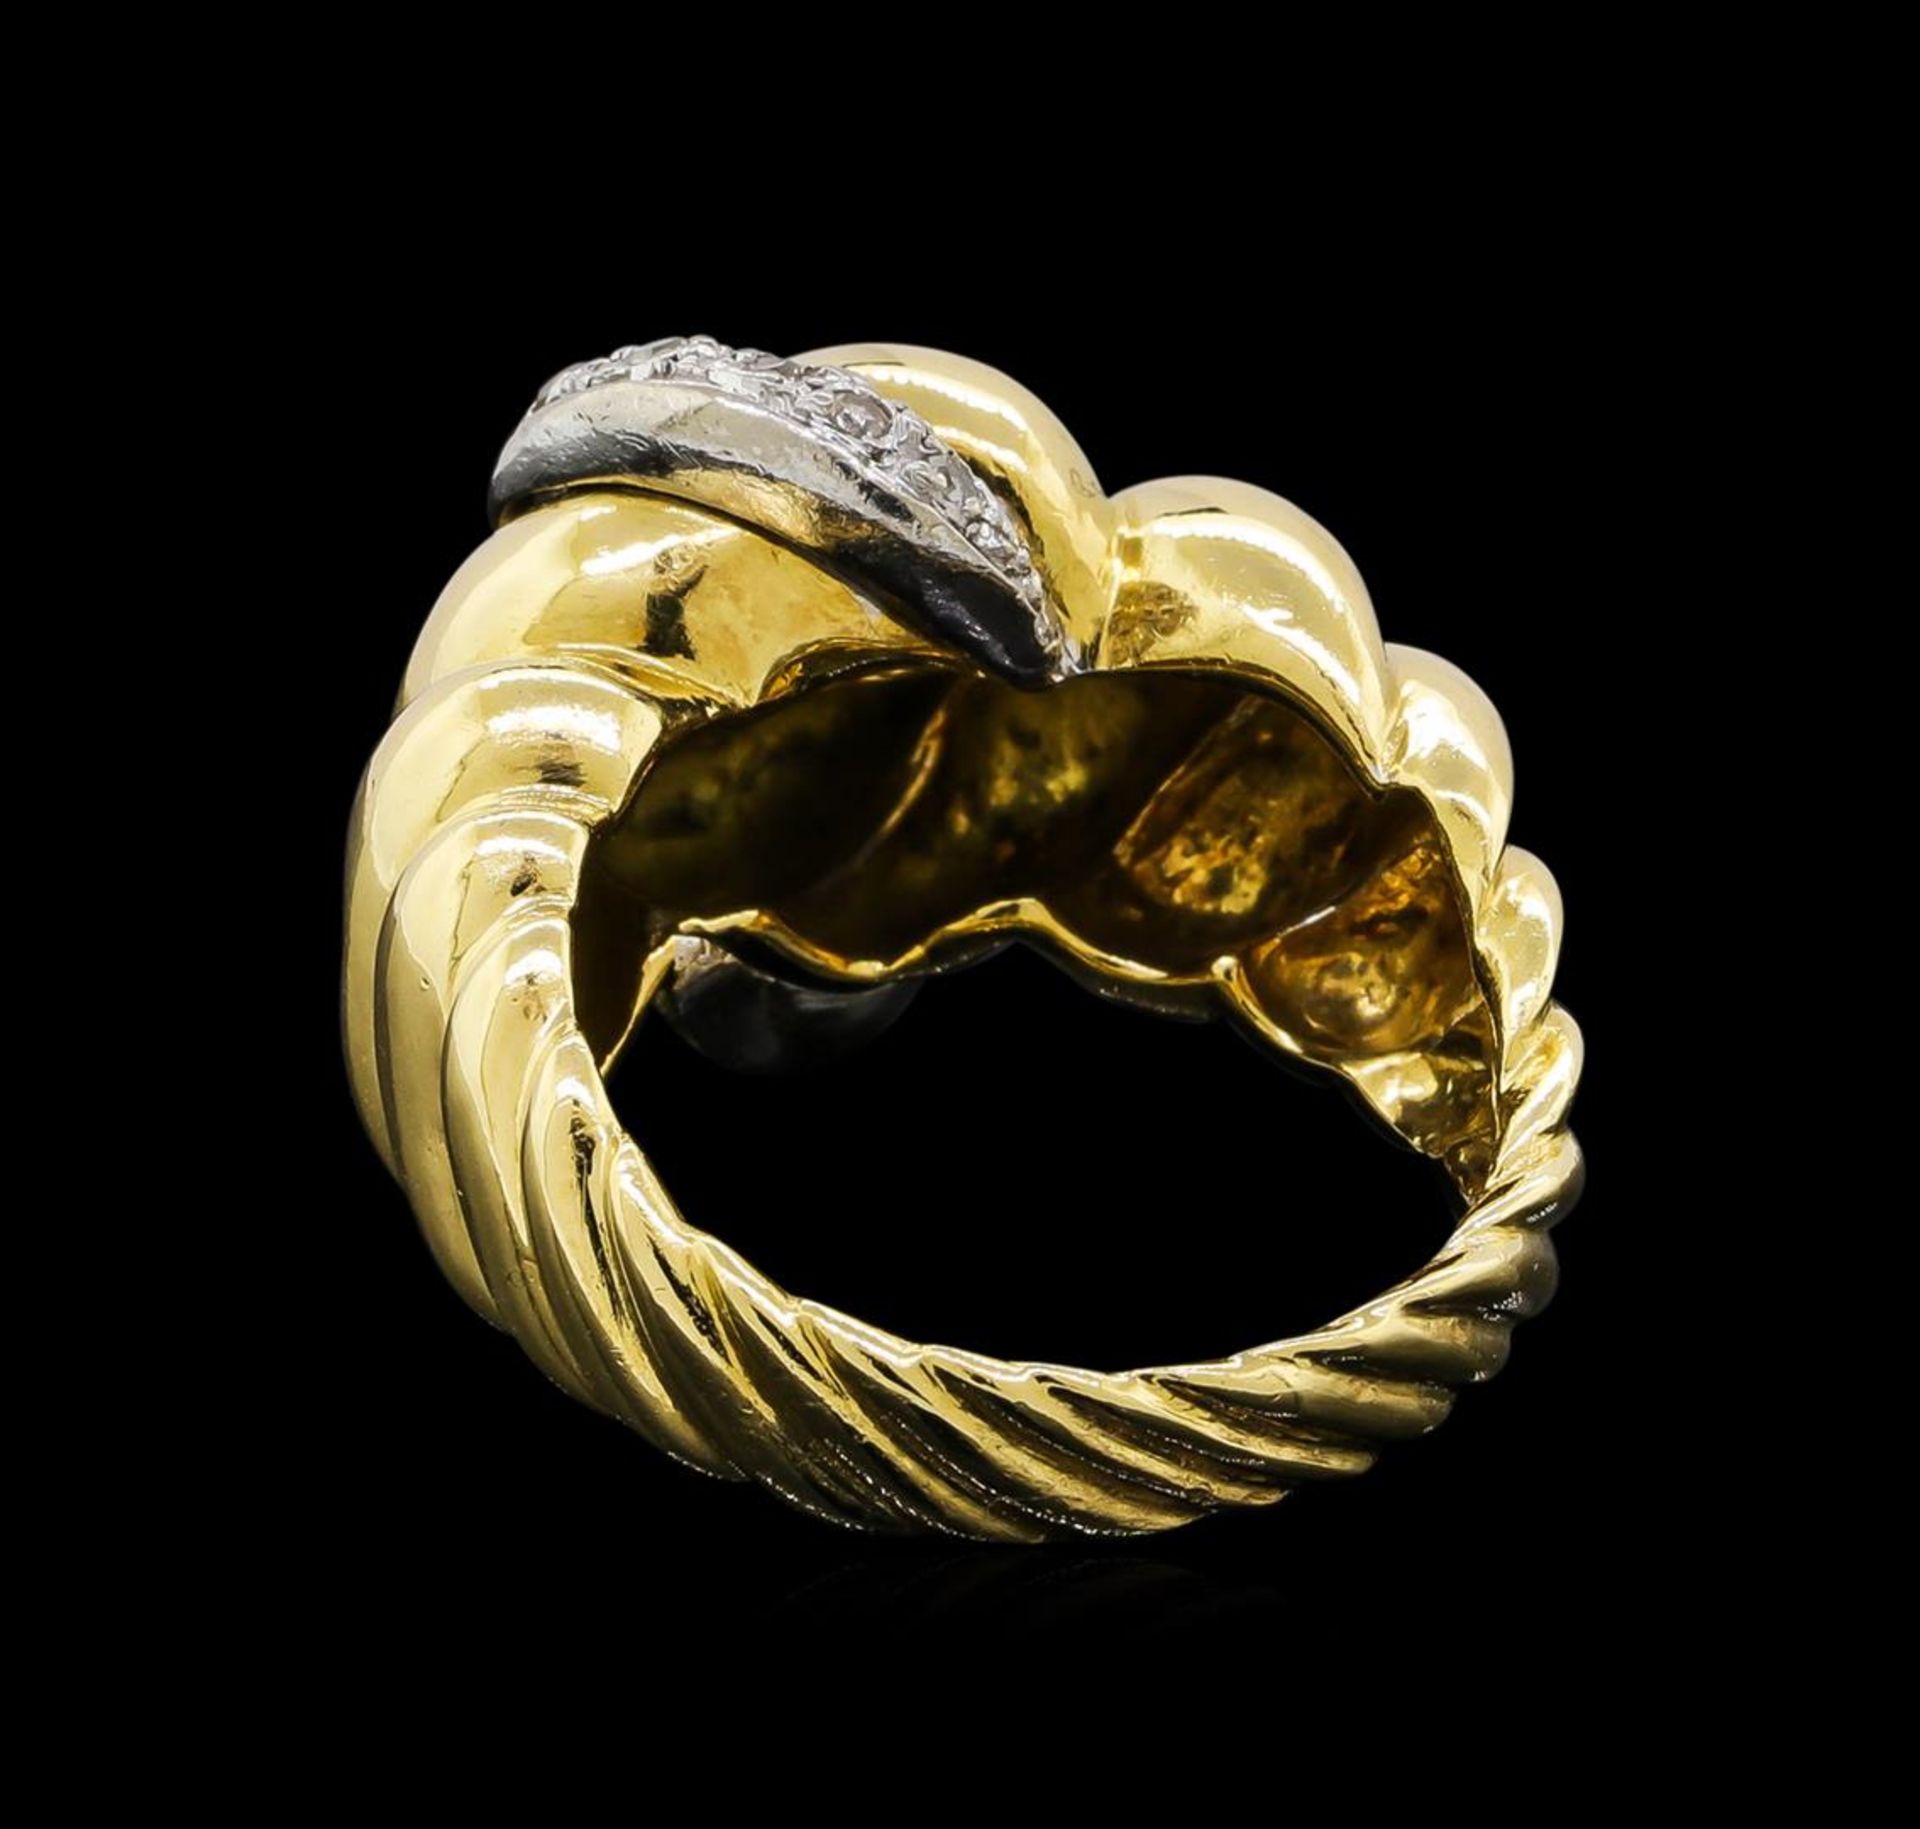 18KT Two-Tone Gold 0.43 ctw Diamond Ring - Image 3 of 5